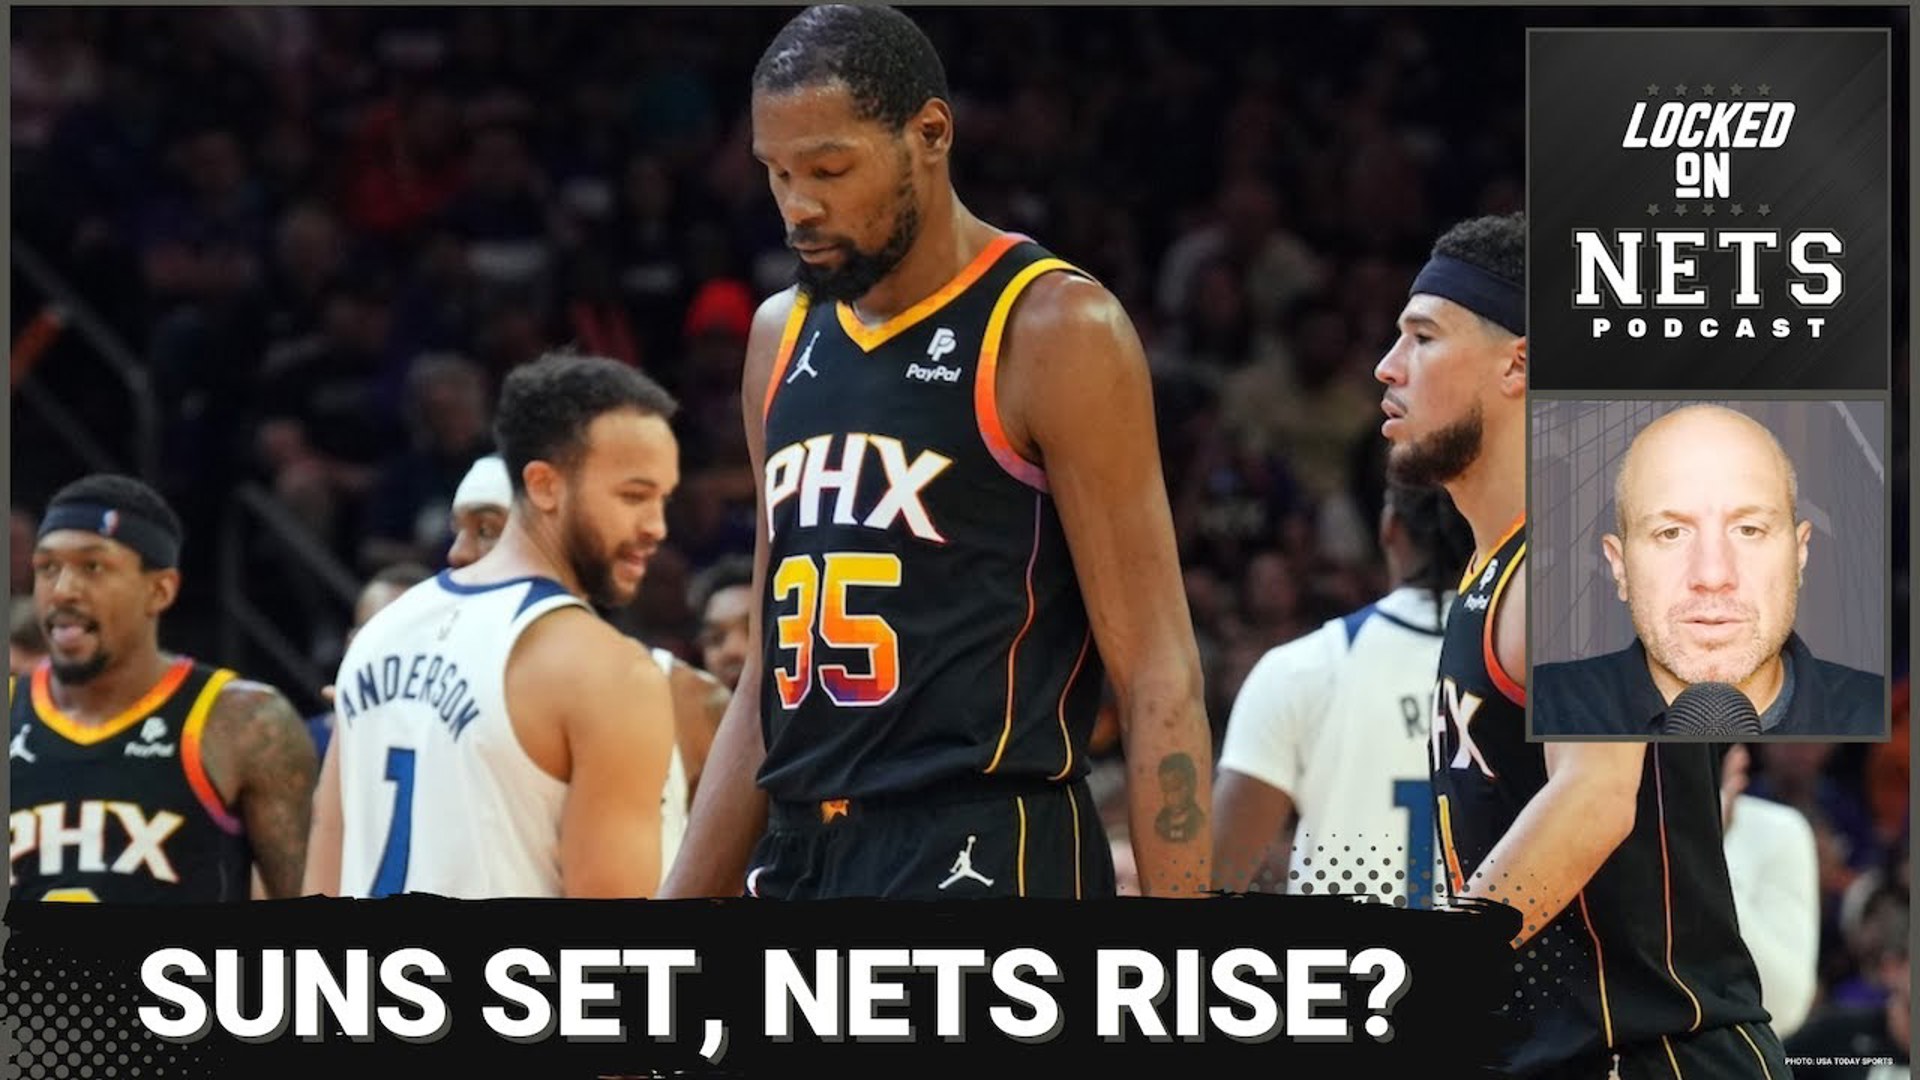 The Suns appear headed out of the playoffs and that could have ramifications on the Nets moving forward.